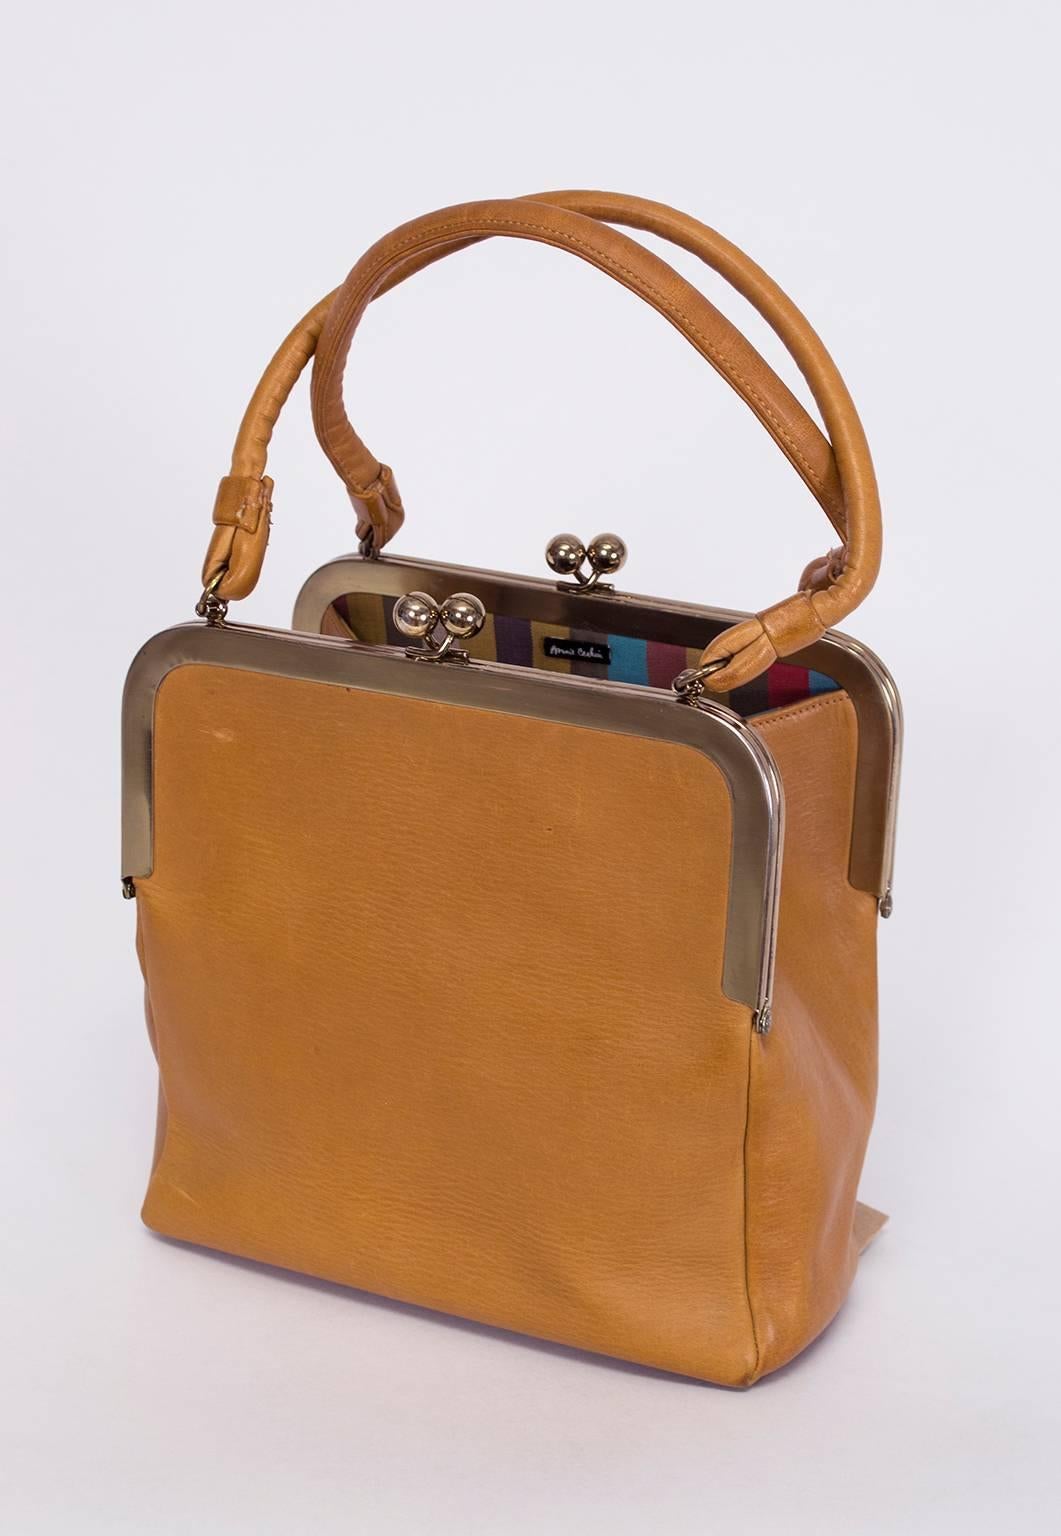 Bonnie Cashin joined handbag manufacturer Coach in 1962 and launched its women’s accessories division to nationwide acclaim.  Though all her original handbags enjoy reverential collectible status, this square double kisslock remains one of her most